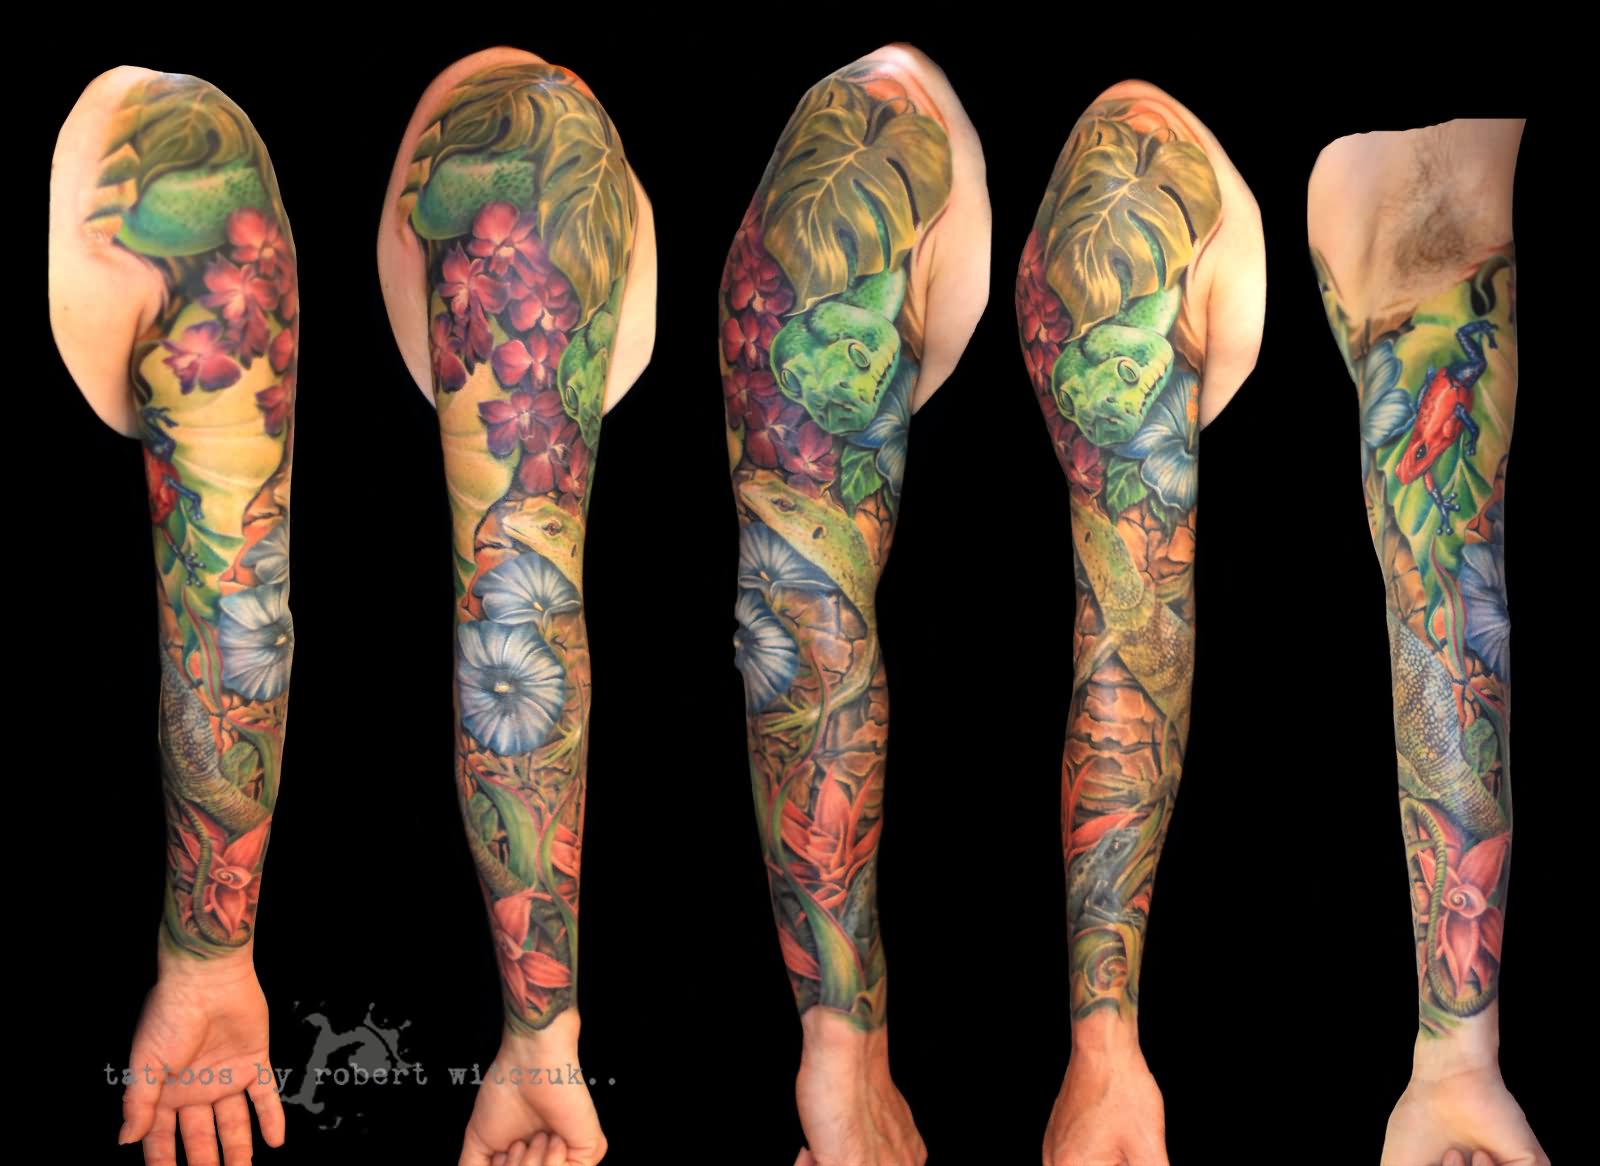 Colorful Nature Flowers Tattoo On Right Full Sleeve By Robert Witczuk